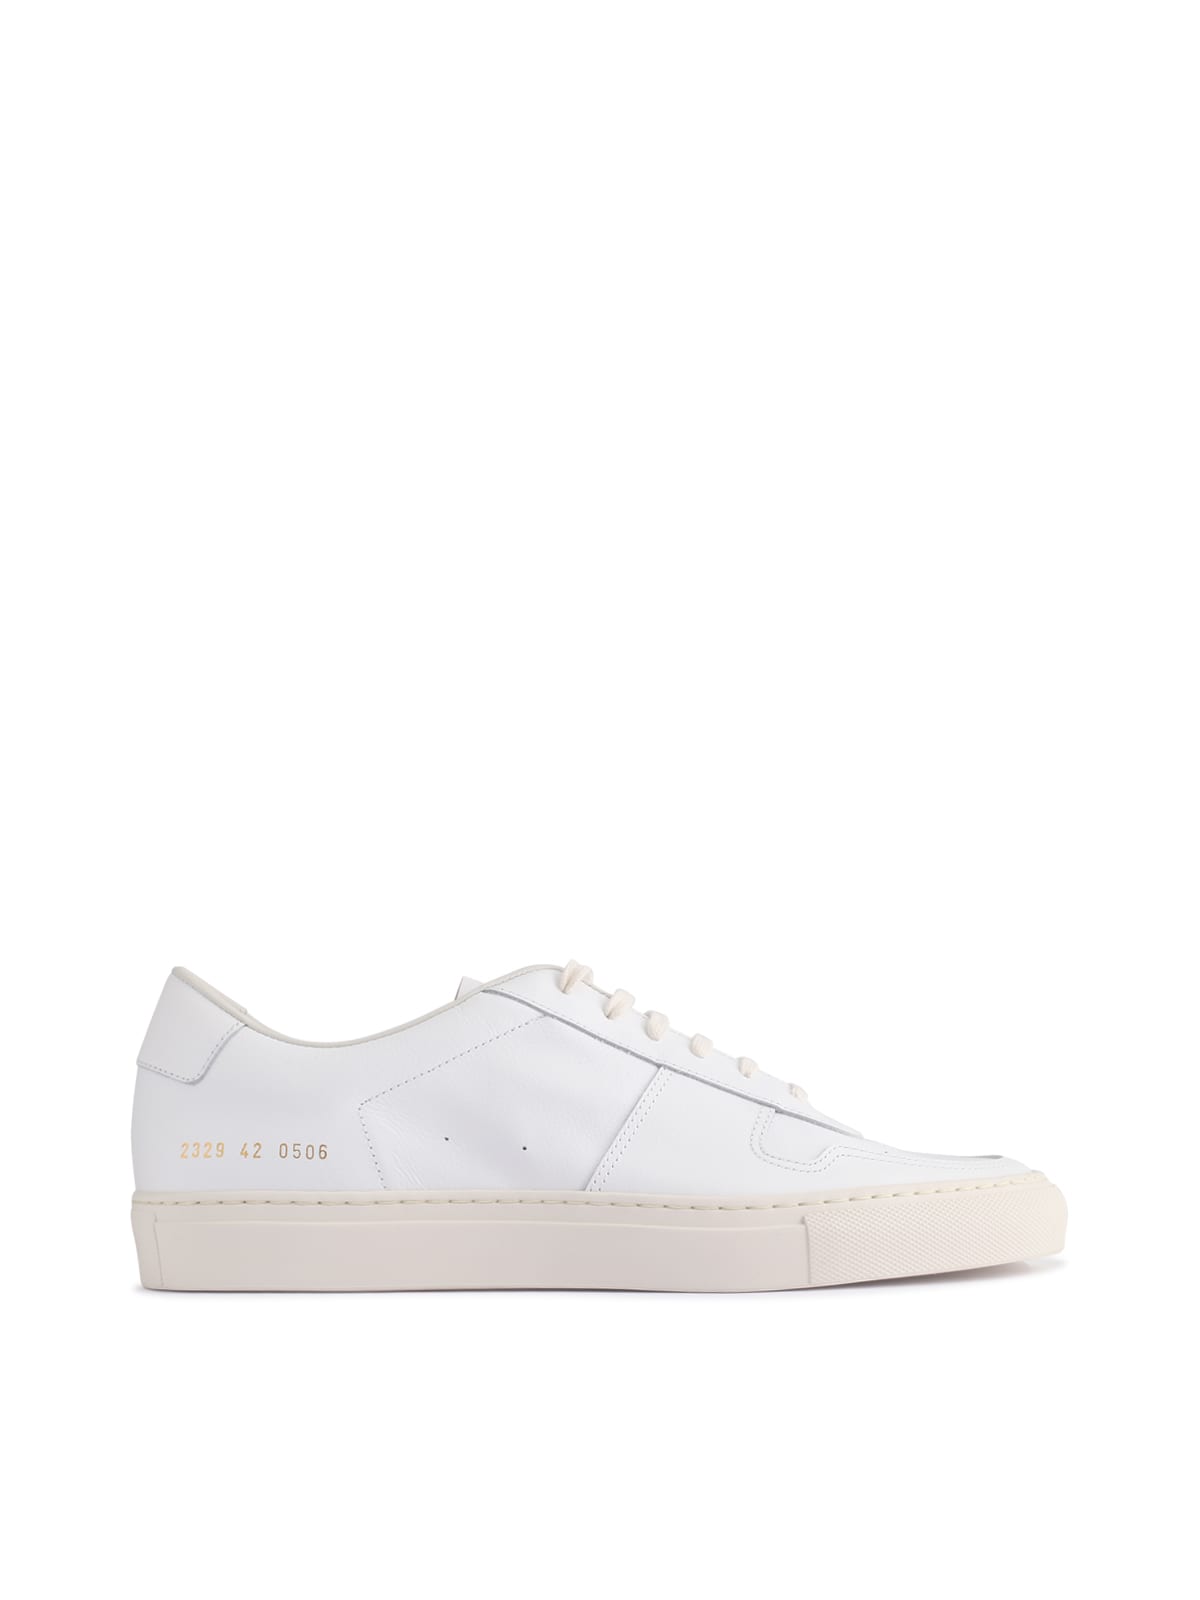 Common Projects Sneaker Pebbled Nappa Leather Upper